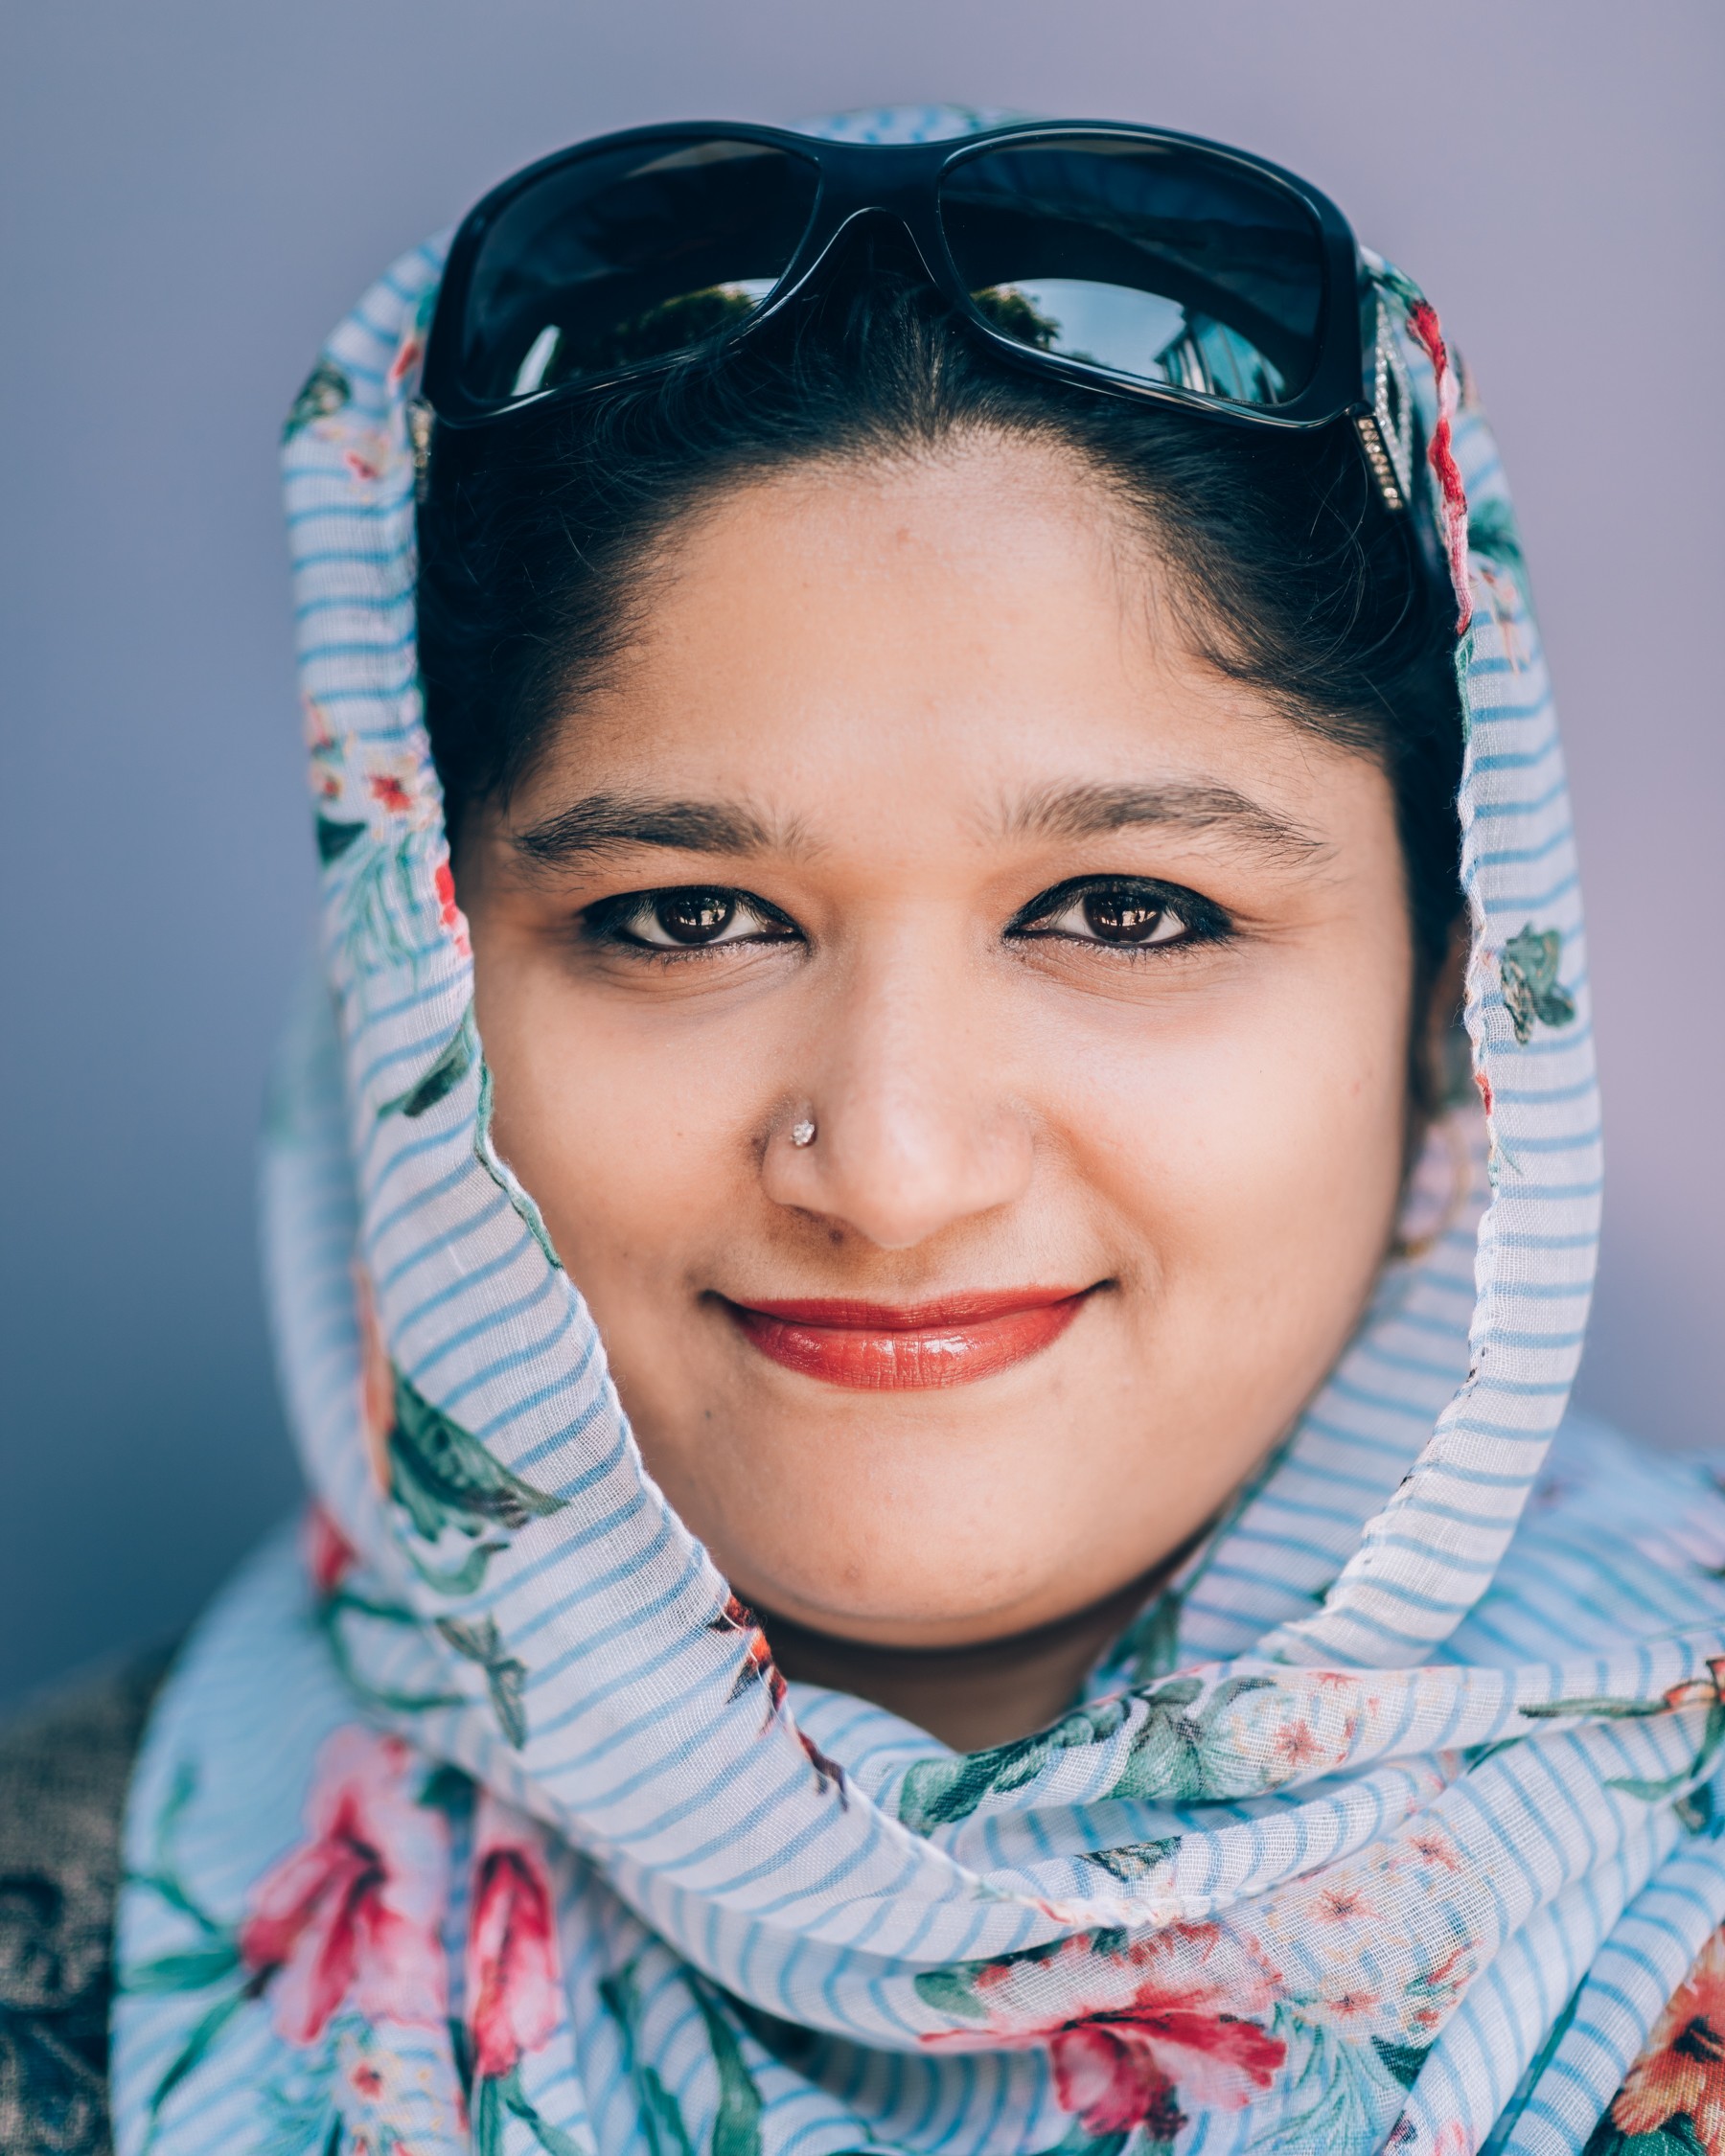 Andaleeb Wajid is determined to break down stereotypes of Muslims in her books.